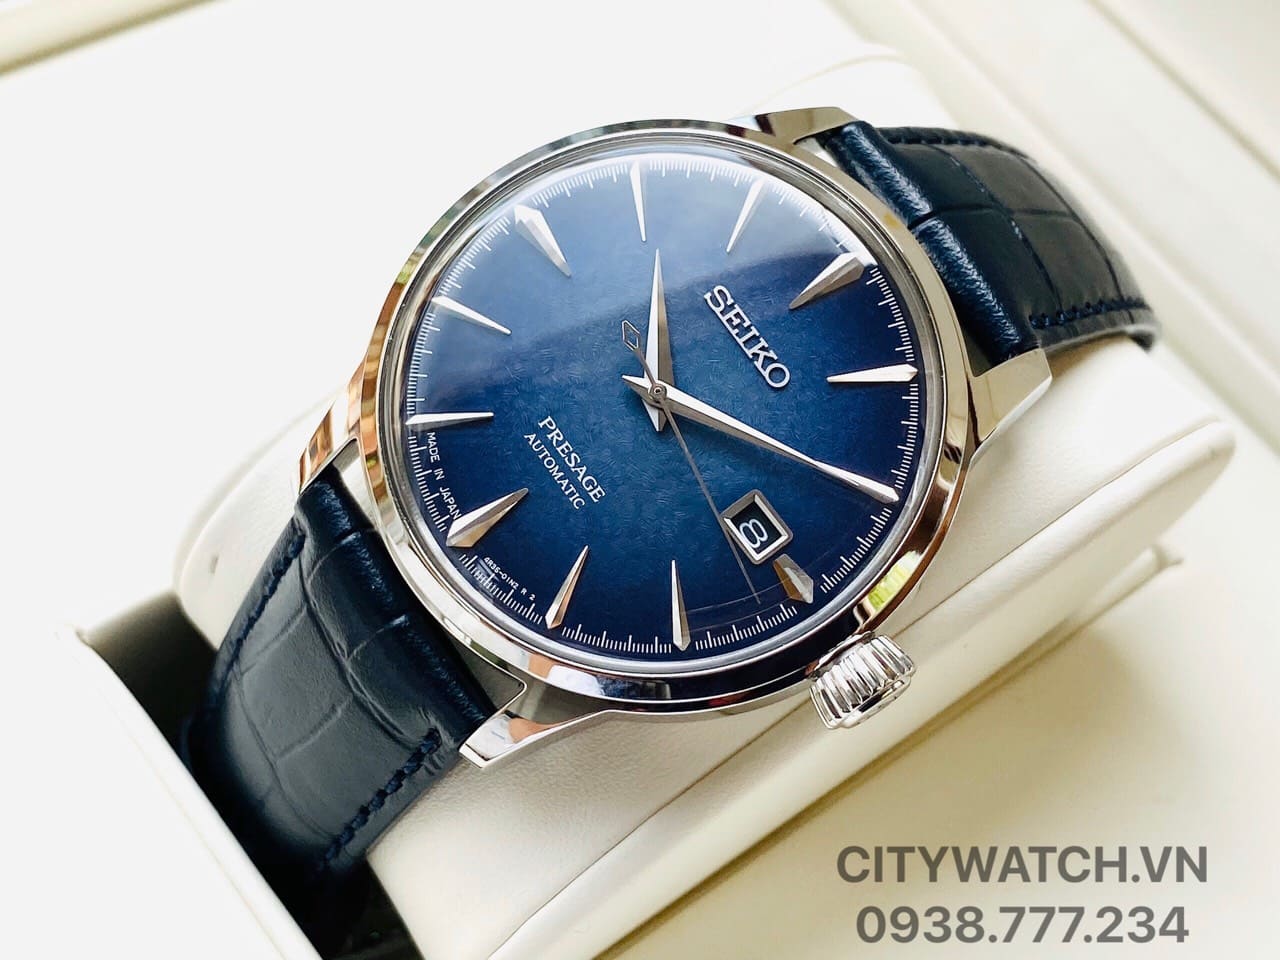 Seiko Presage Limited Edition SRPC01J1 (SRPC01) – CITYWATCH